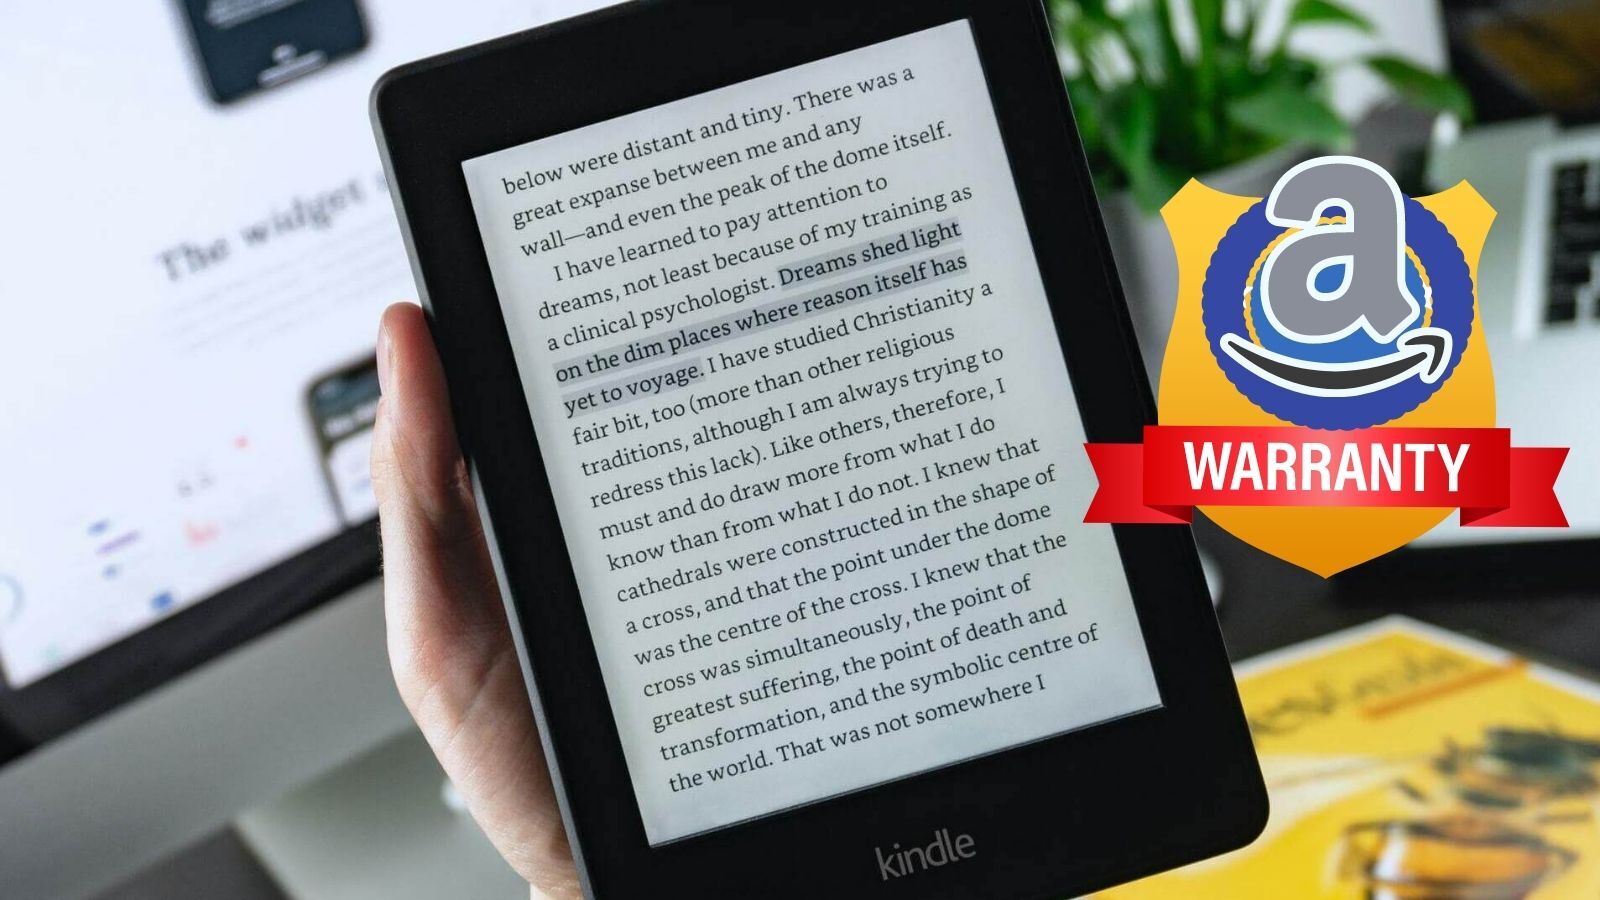 Amazon Kindle Warranty (Something You're Interested In)